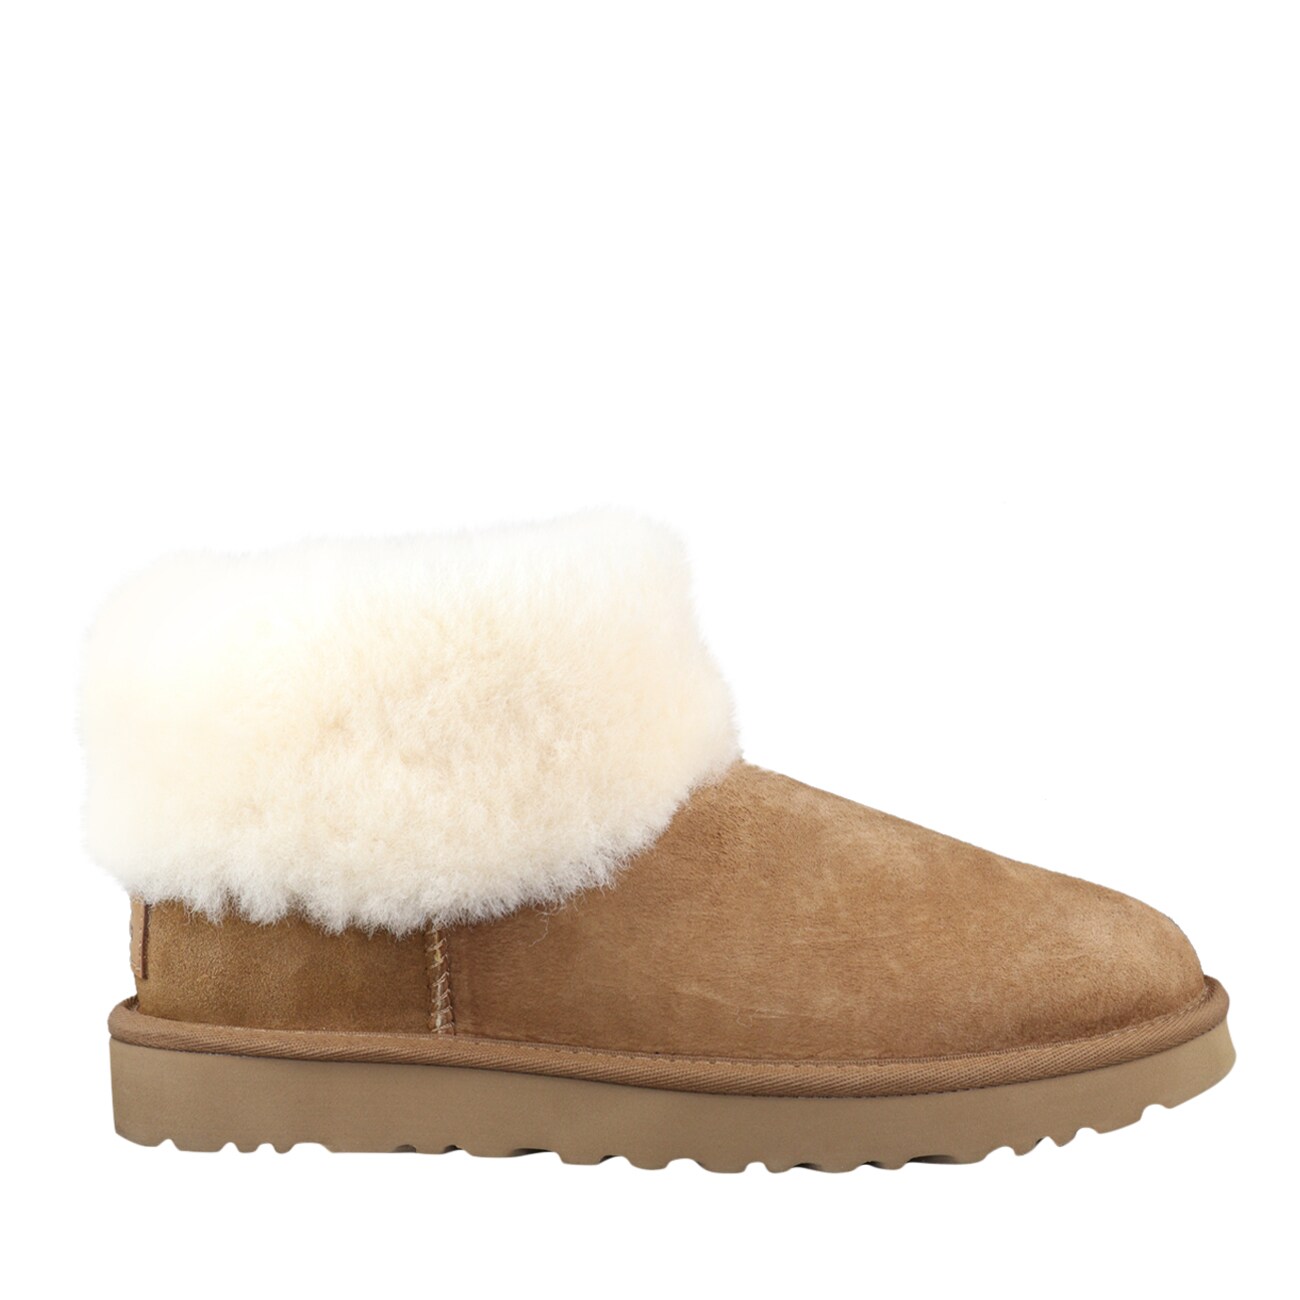 ugg slippers size 3